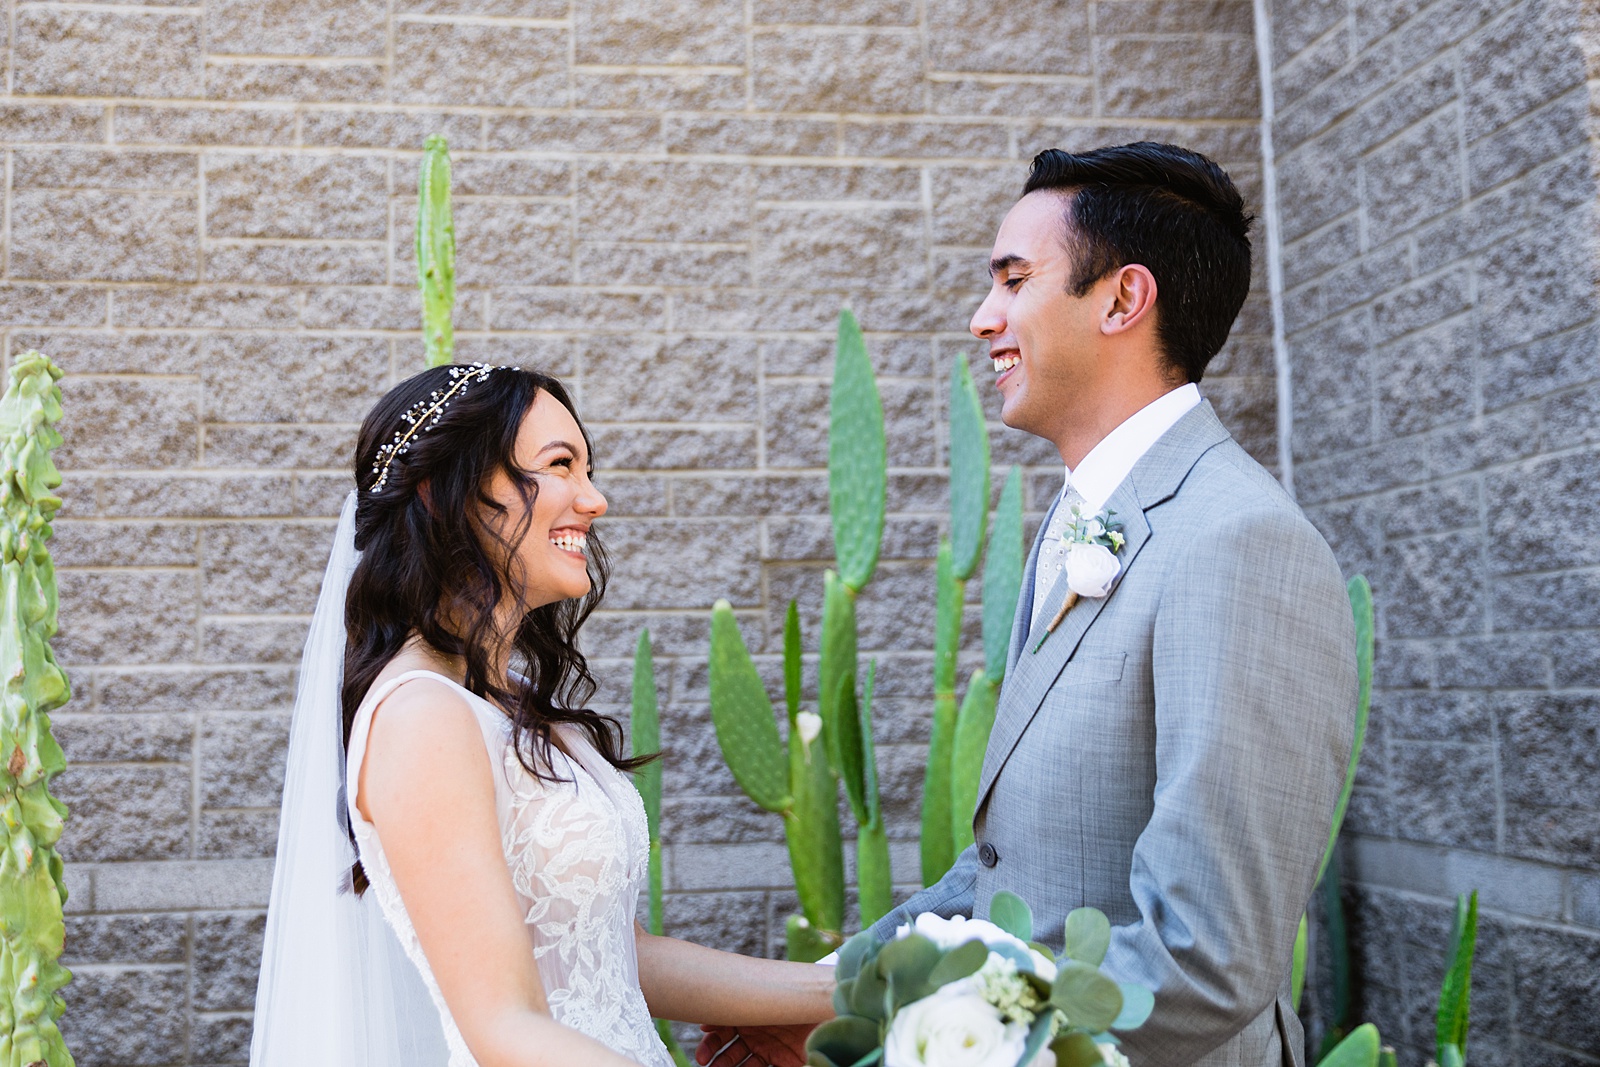 Bride and groom share an intimate moment during their first look at Hyatt Regency Scottsdale Resort & Spa At Gainey Ranch by Phoenix wedding photographer PMA Photography.